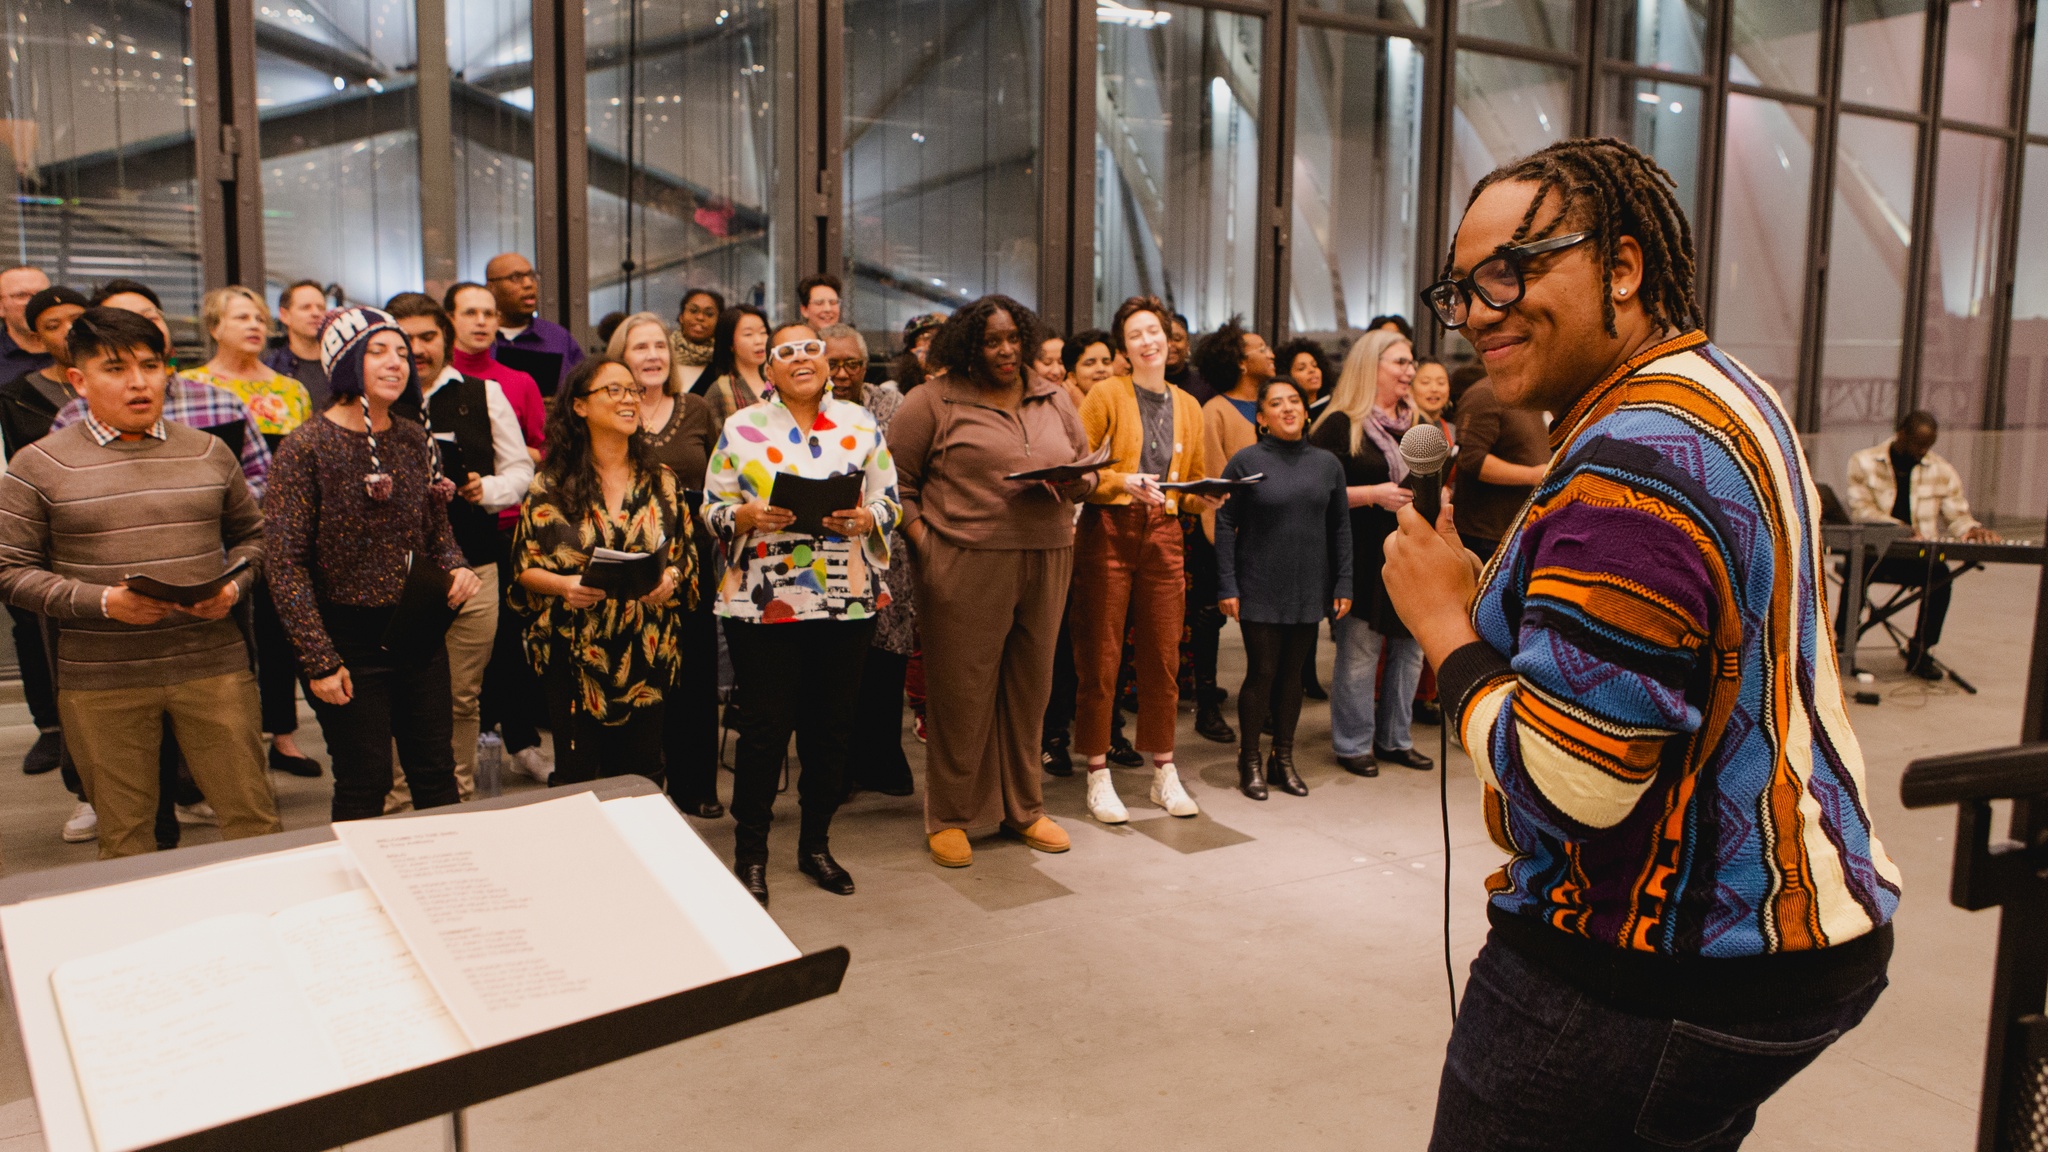 The Fire Ensemble choir rehearses in an event space at The Shed. To the left, the choir's artistic director Troy Anthony stands holding a microphone facing the choir, his head turned to the side with a broad smile on his face. 